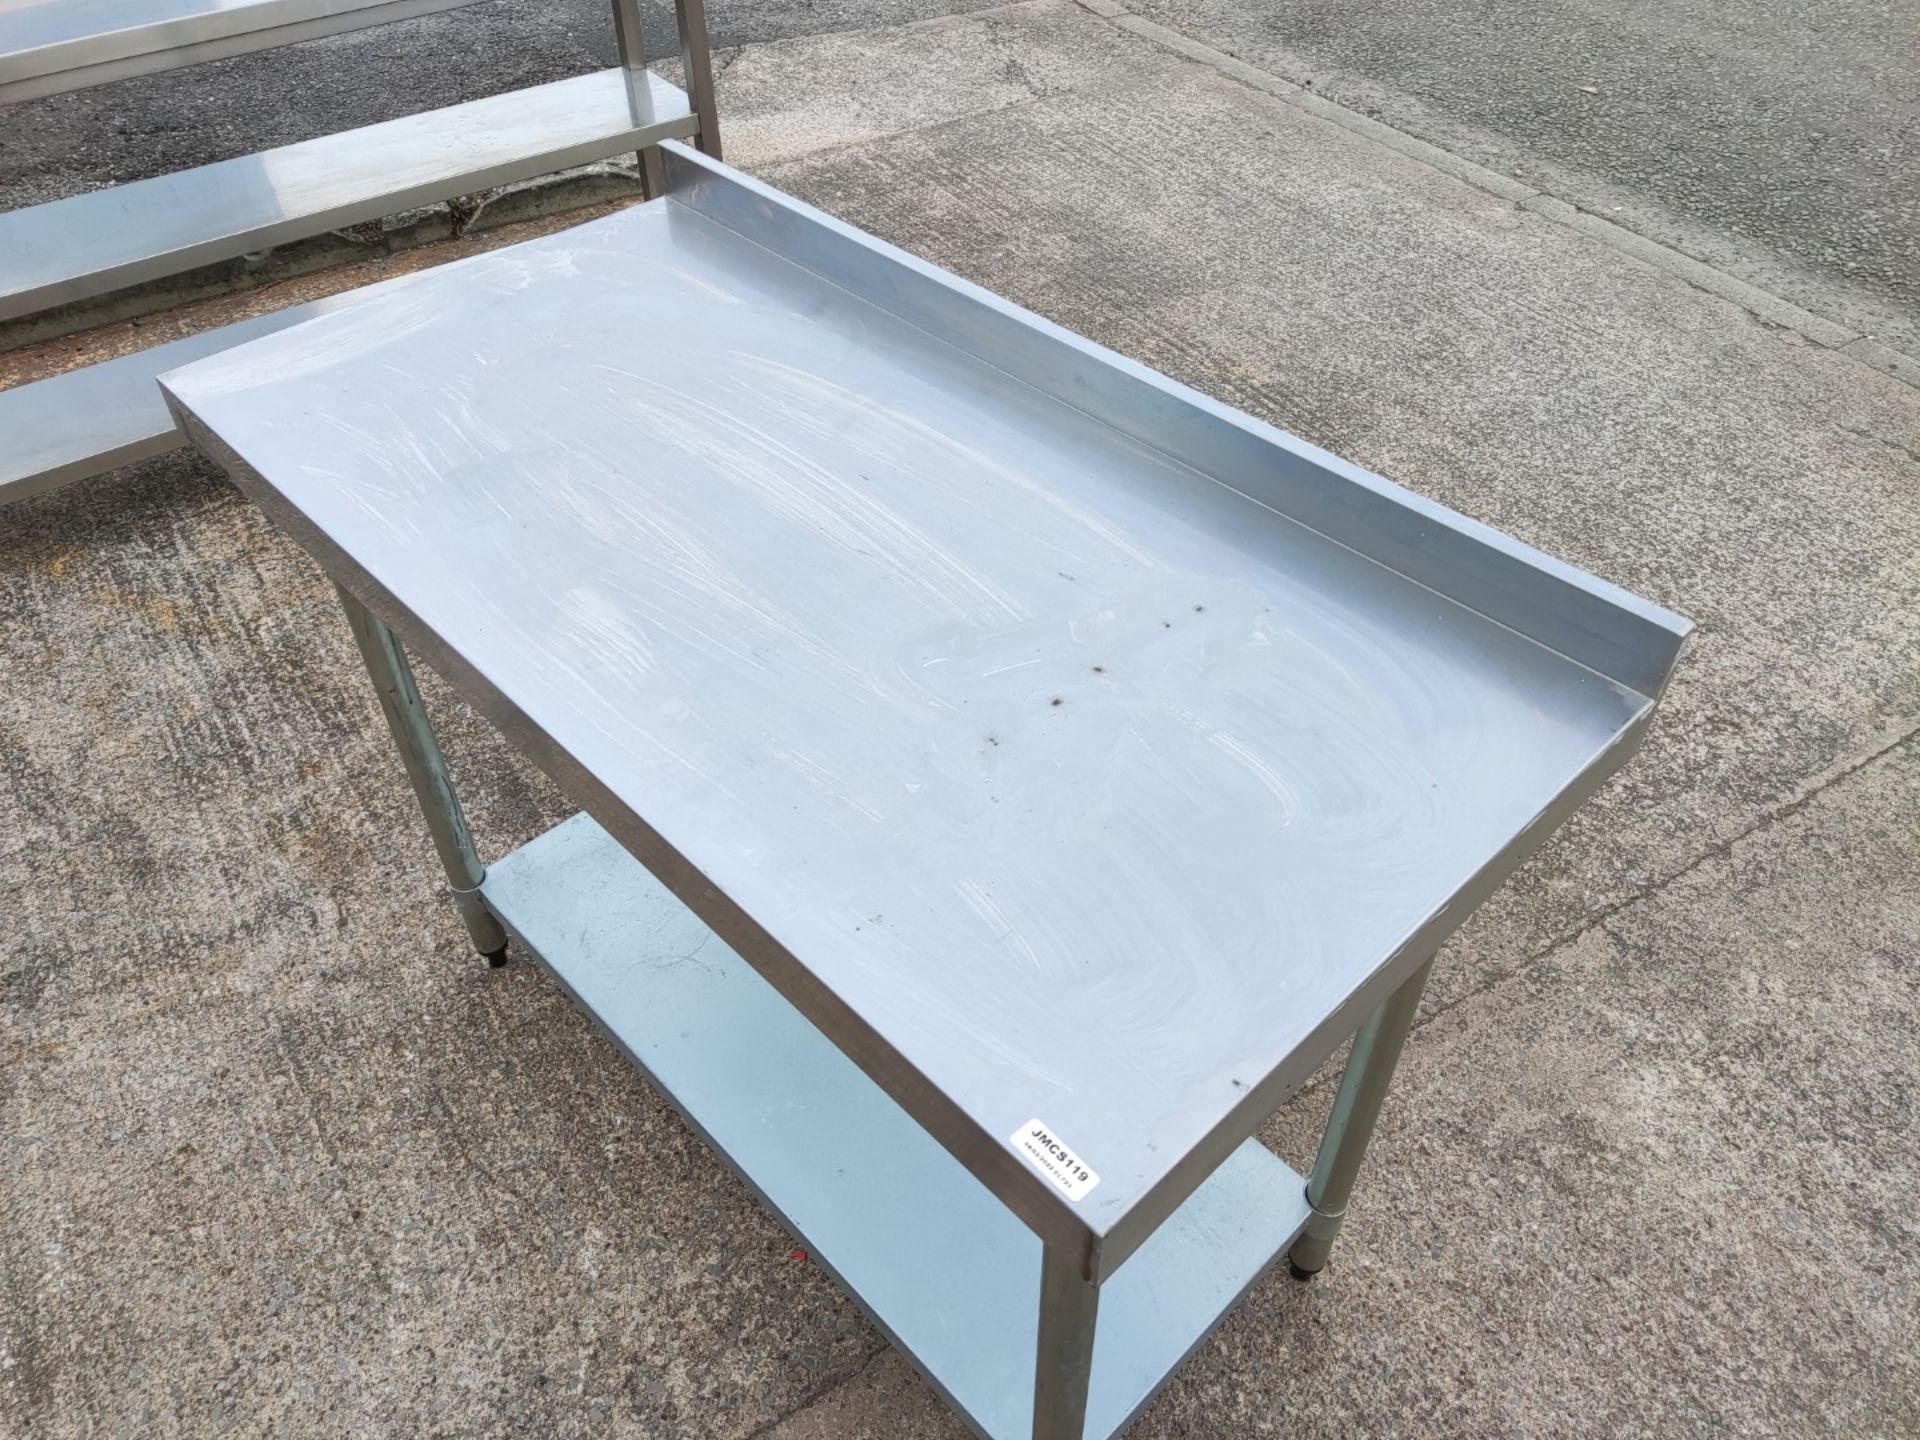 1 x Vogue Stainless Steel Prep Bench with Upstand and Shelf - 120cm (L) x 60cm (W) x 90cm (H) - - Image 3 of 7